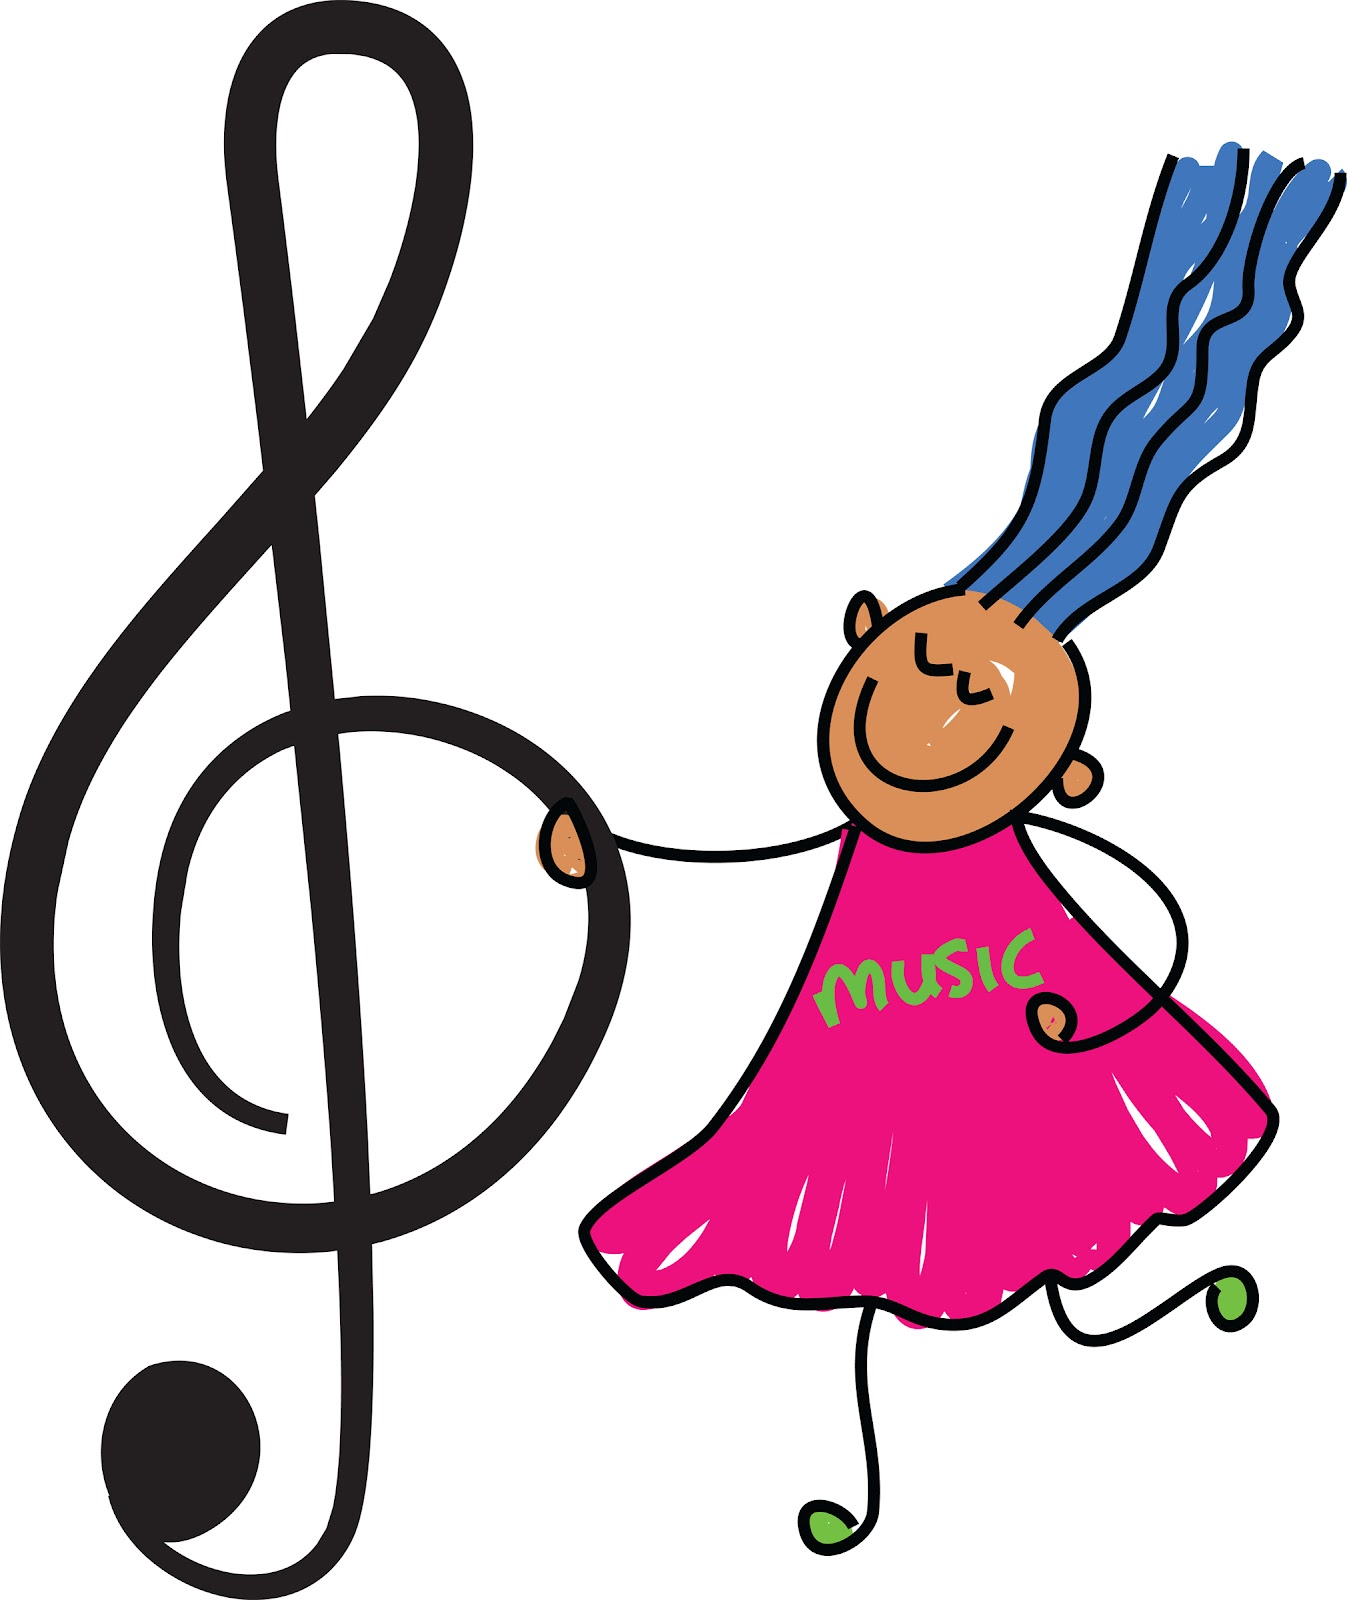 Musical music notes symbols clip art free clipart images 2 image ...